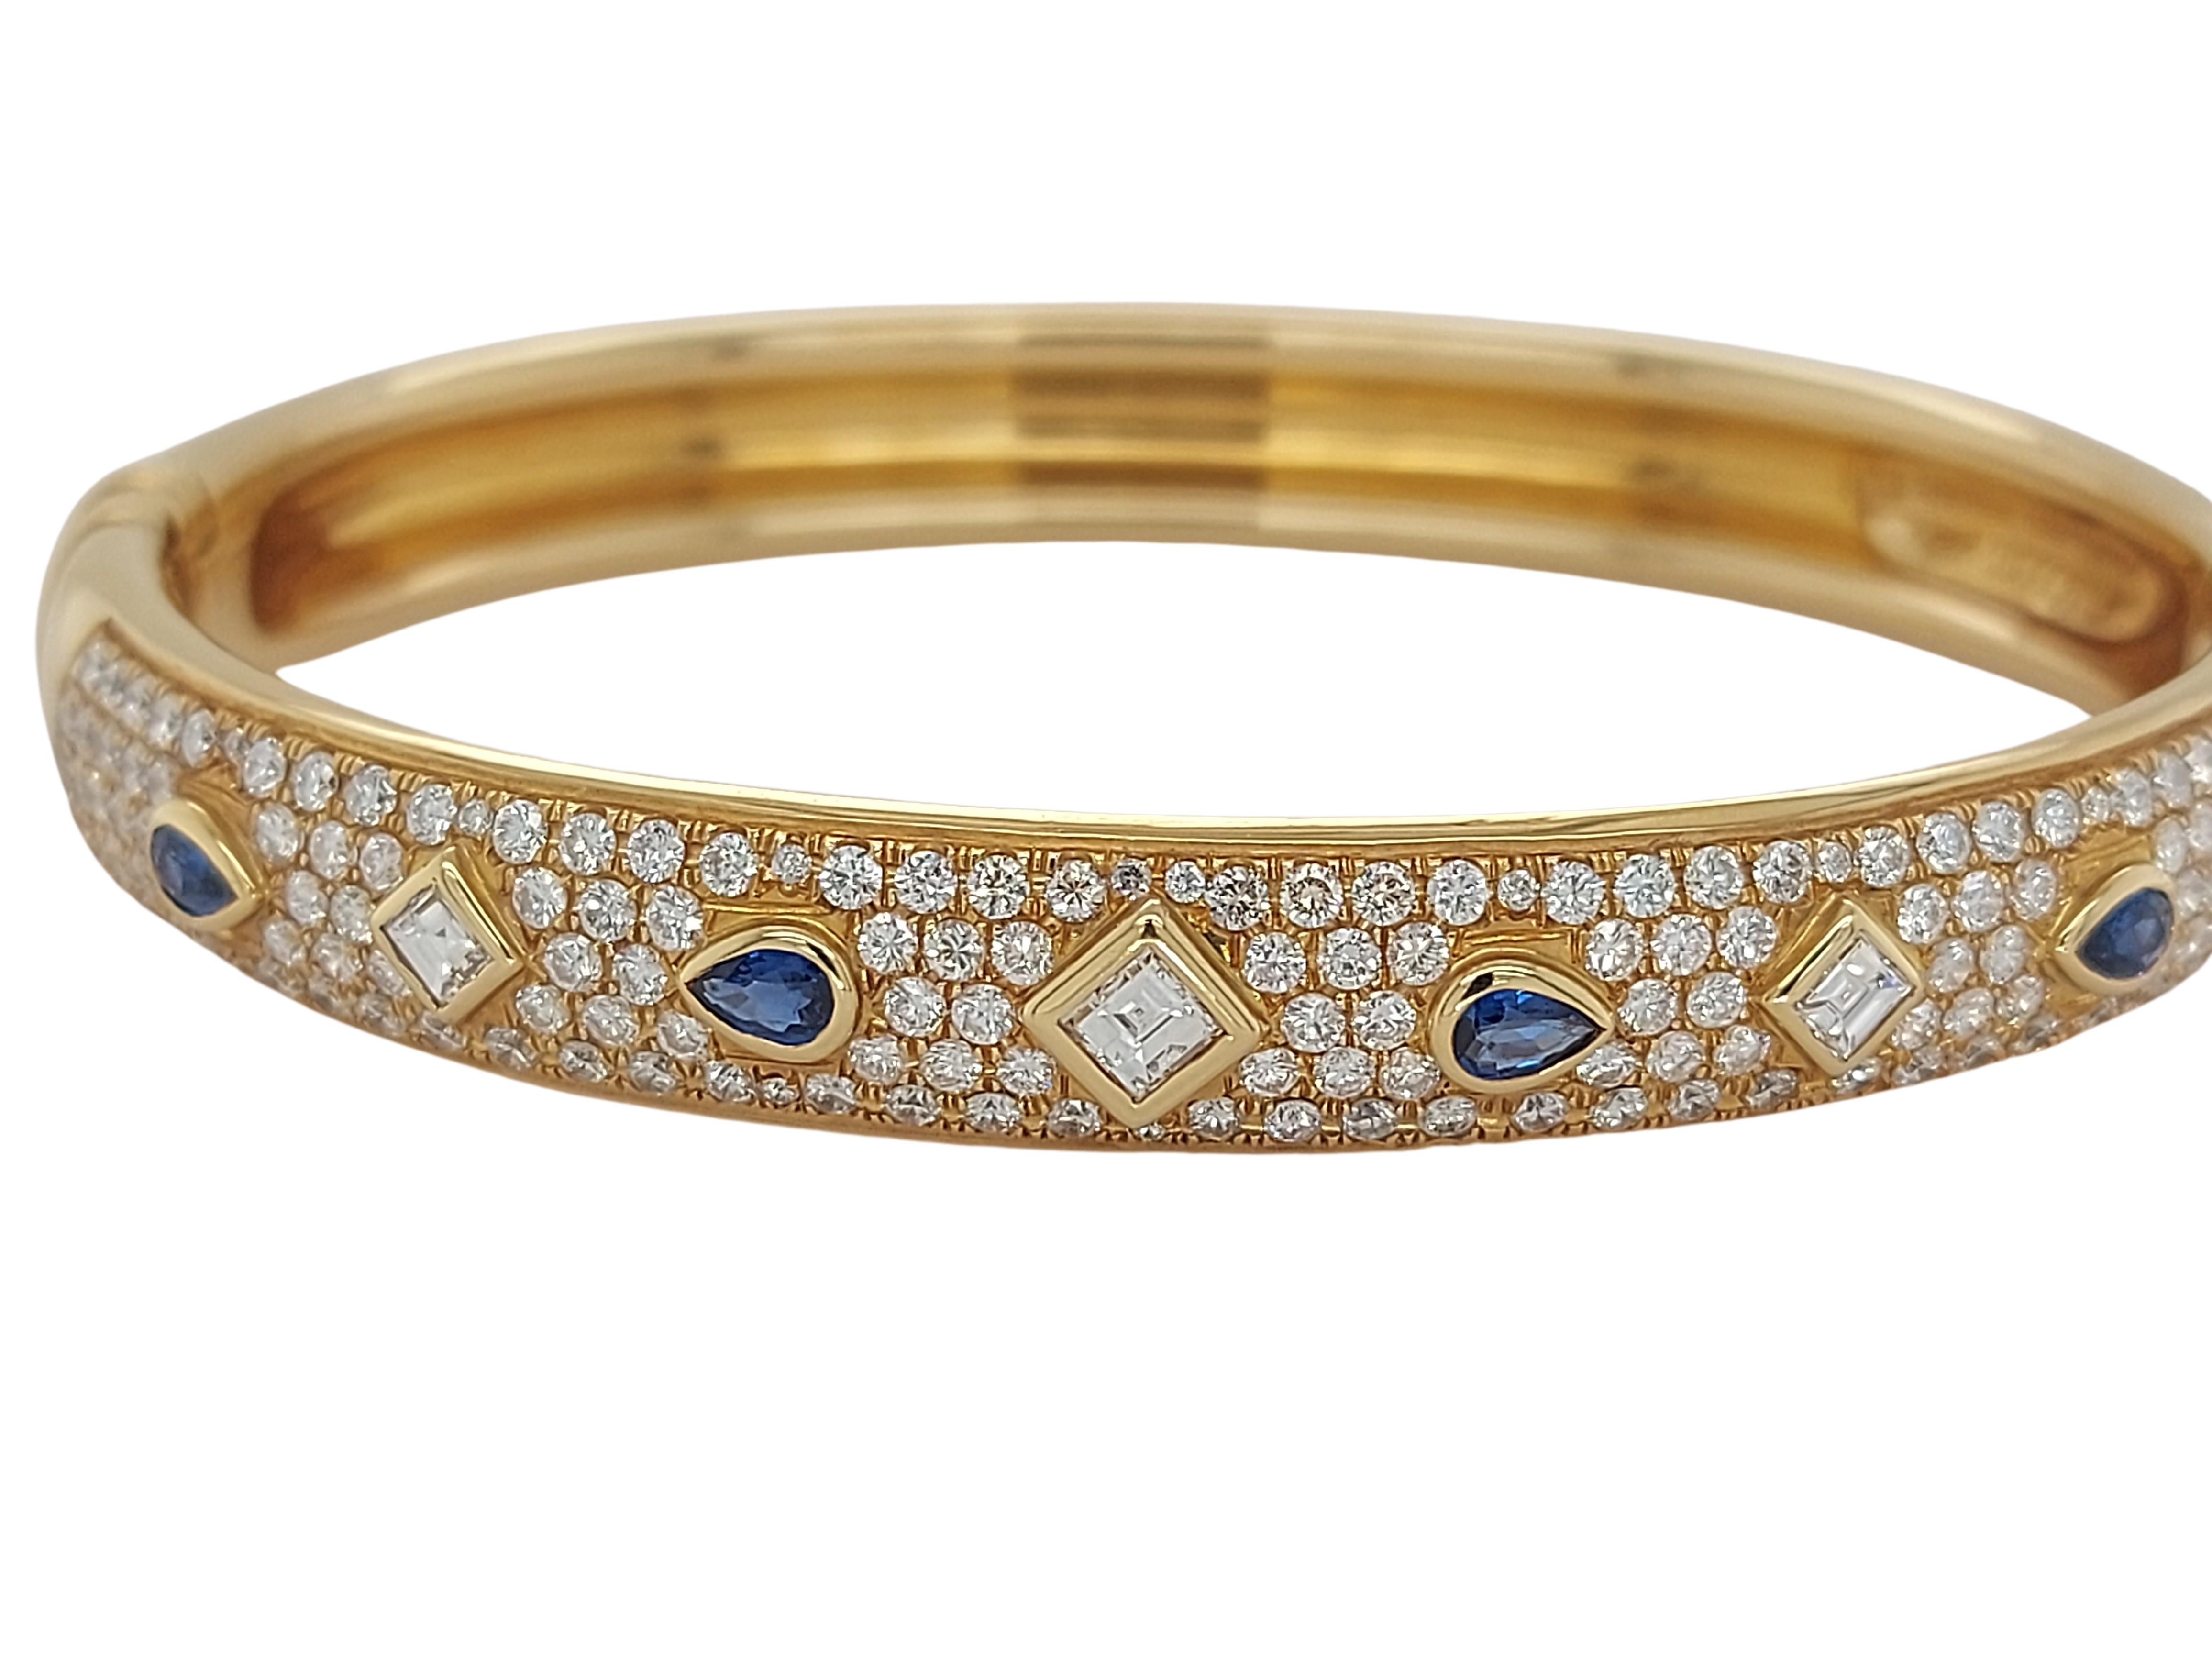 Vintage 18kt Yellow Gold Cartier Bangle Bracelet With Sapphire & Diamonds

Sapphire:  4 sapphires 

Diamonds: 200 brilliant cut diamonds / 3 square cut diamonds  

Material: 18kt Yellow gold

Total weight: 34.5 gram / 1.220 oz / 22.2